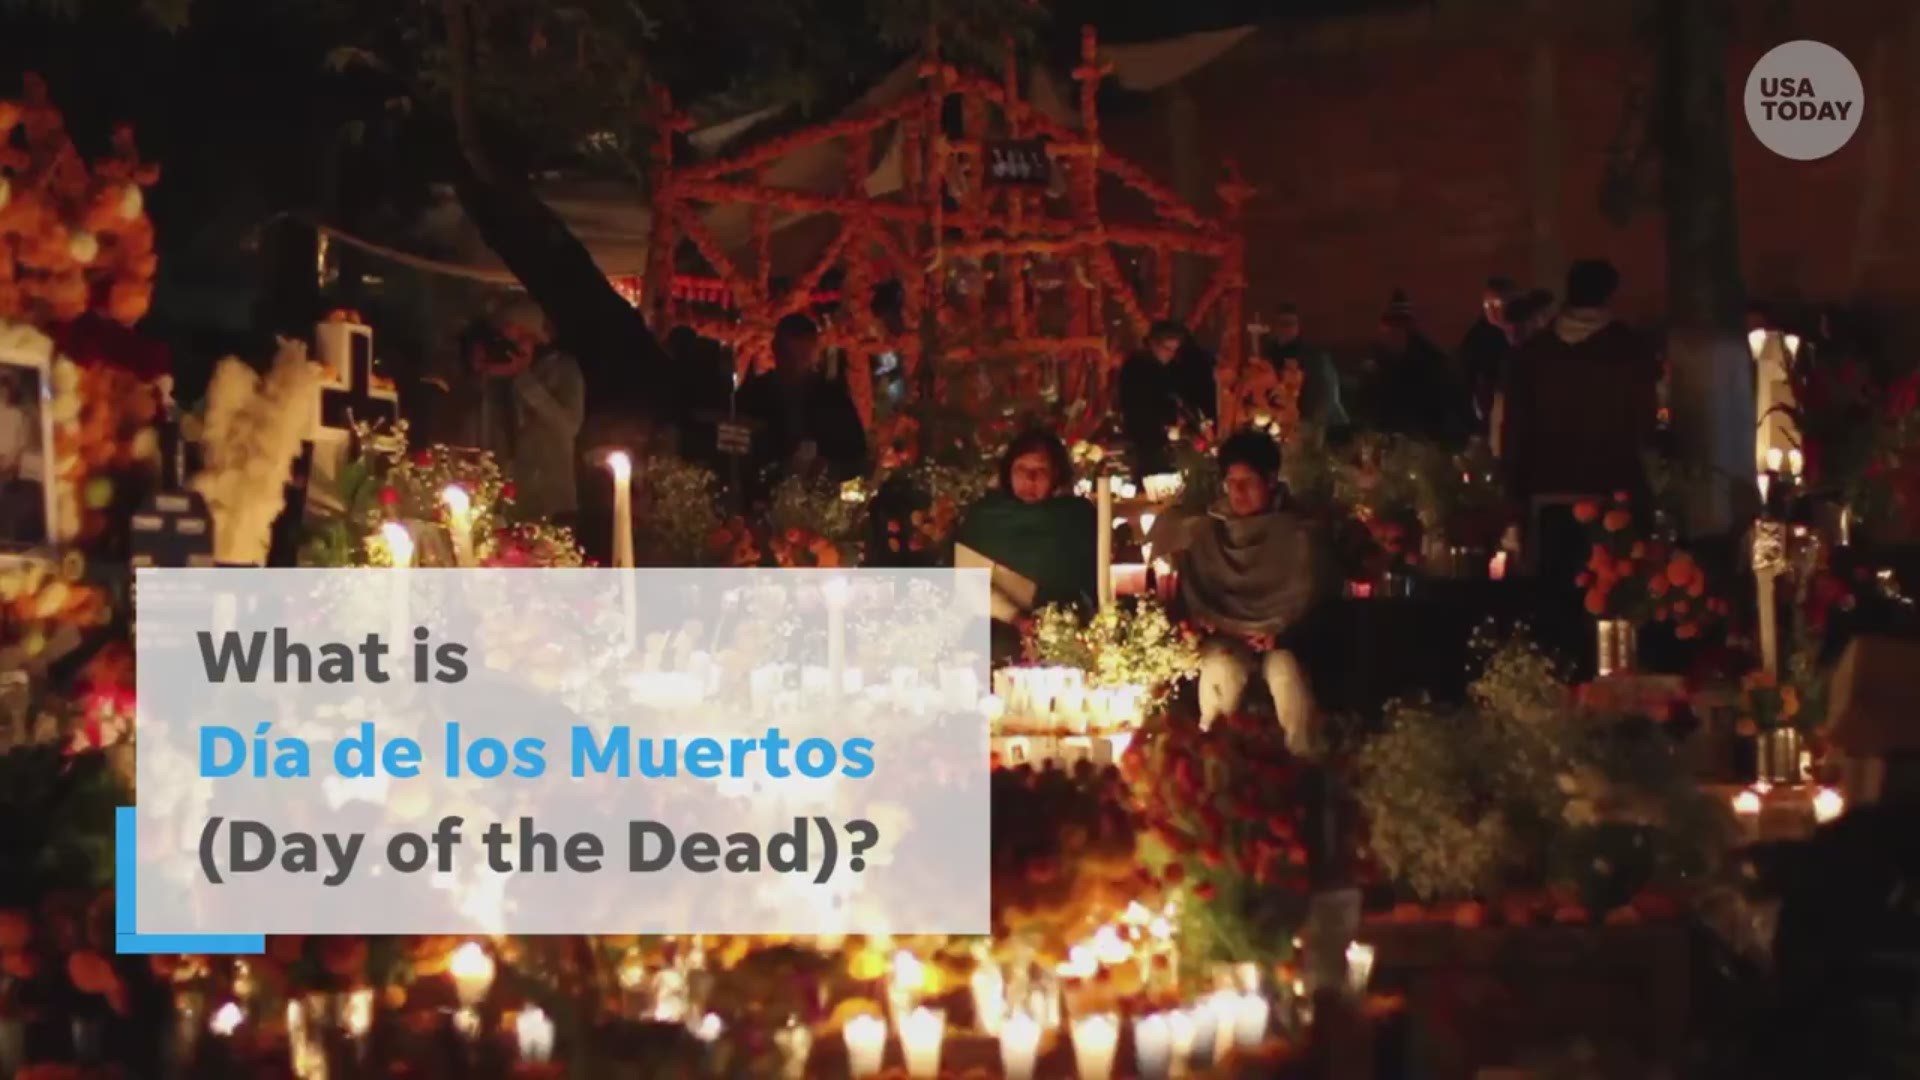 The Mexican holiday surrounds death, but it's a time to celebrate life with loved ones. Learn more about the holiday that's gaining traction in the U.S..